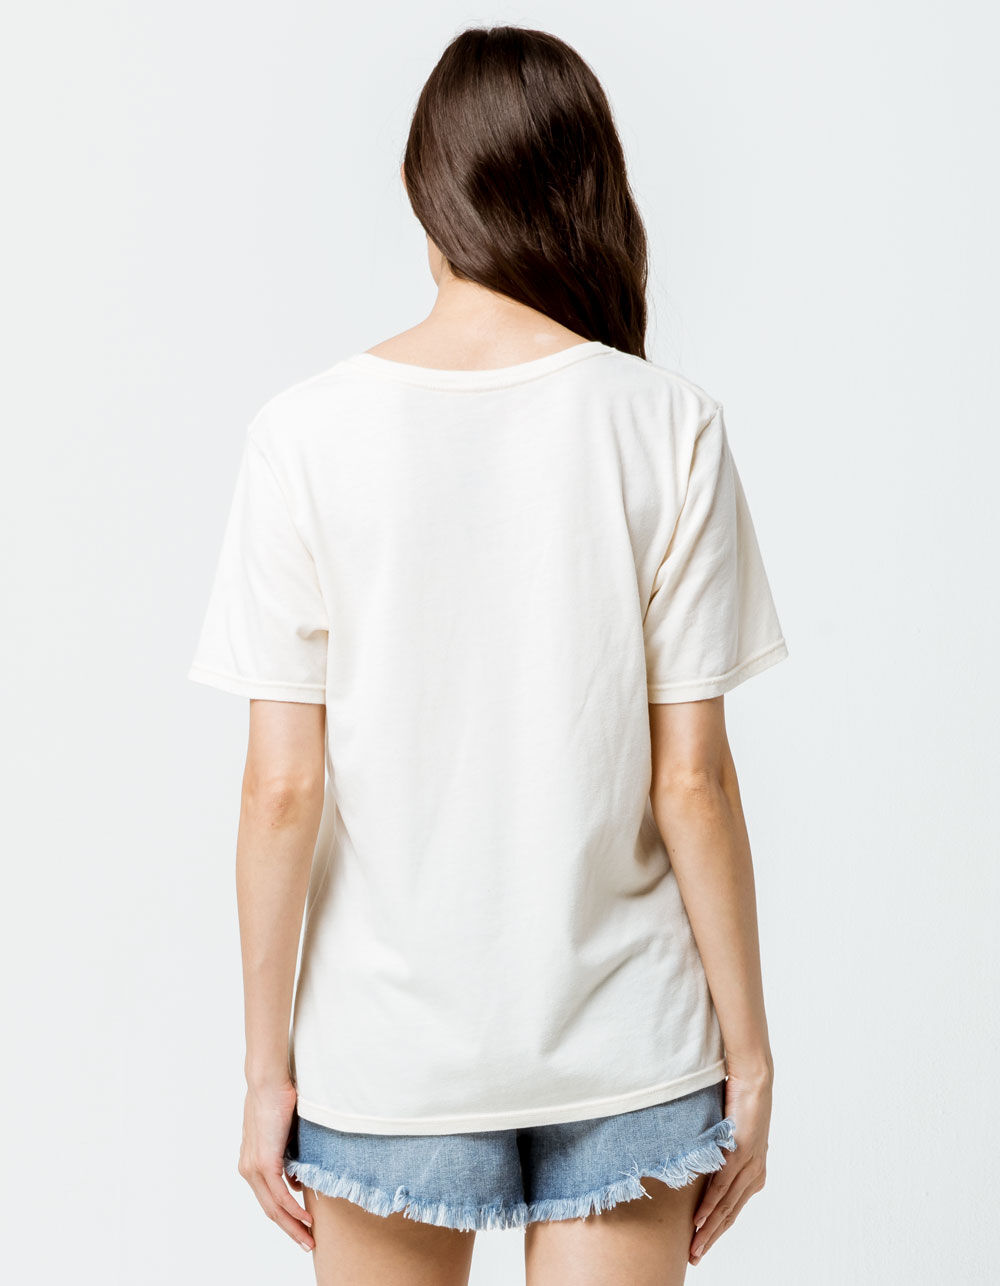 PROJECT KARMA Coors Womens Tee - IVORY | Tillys